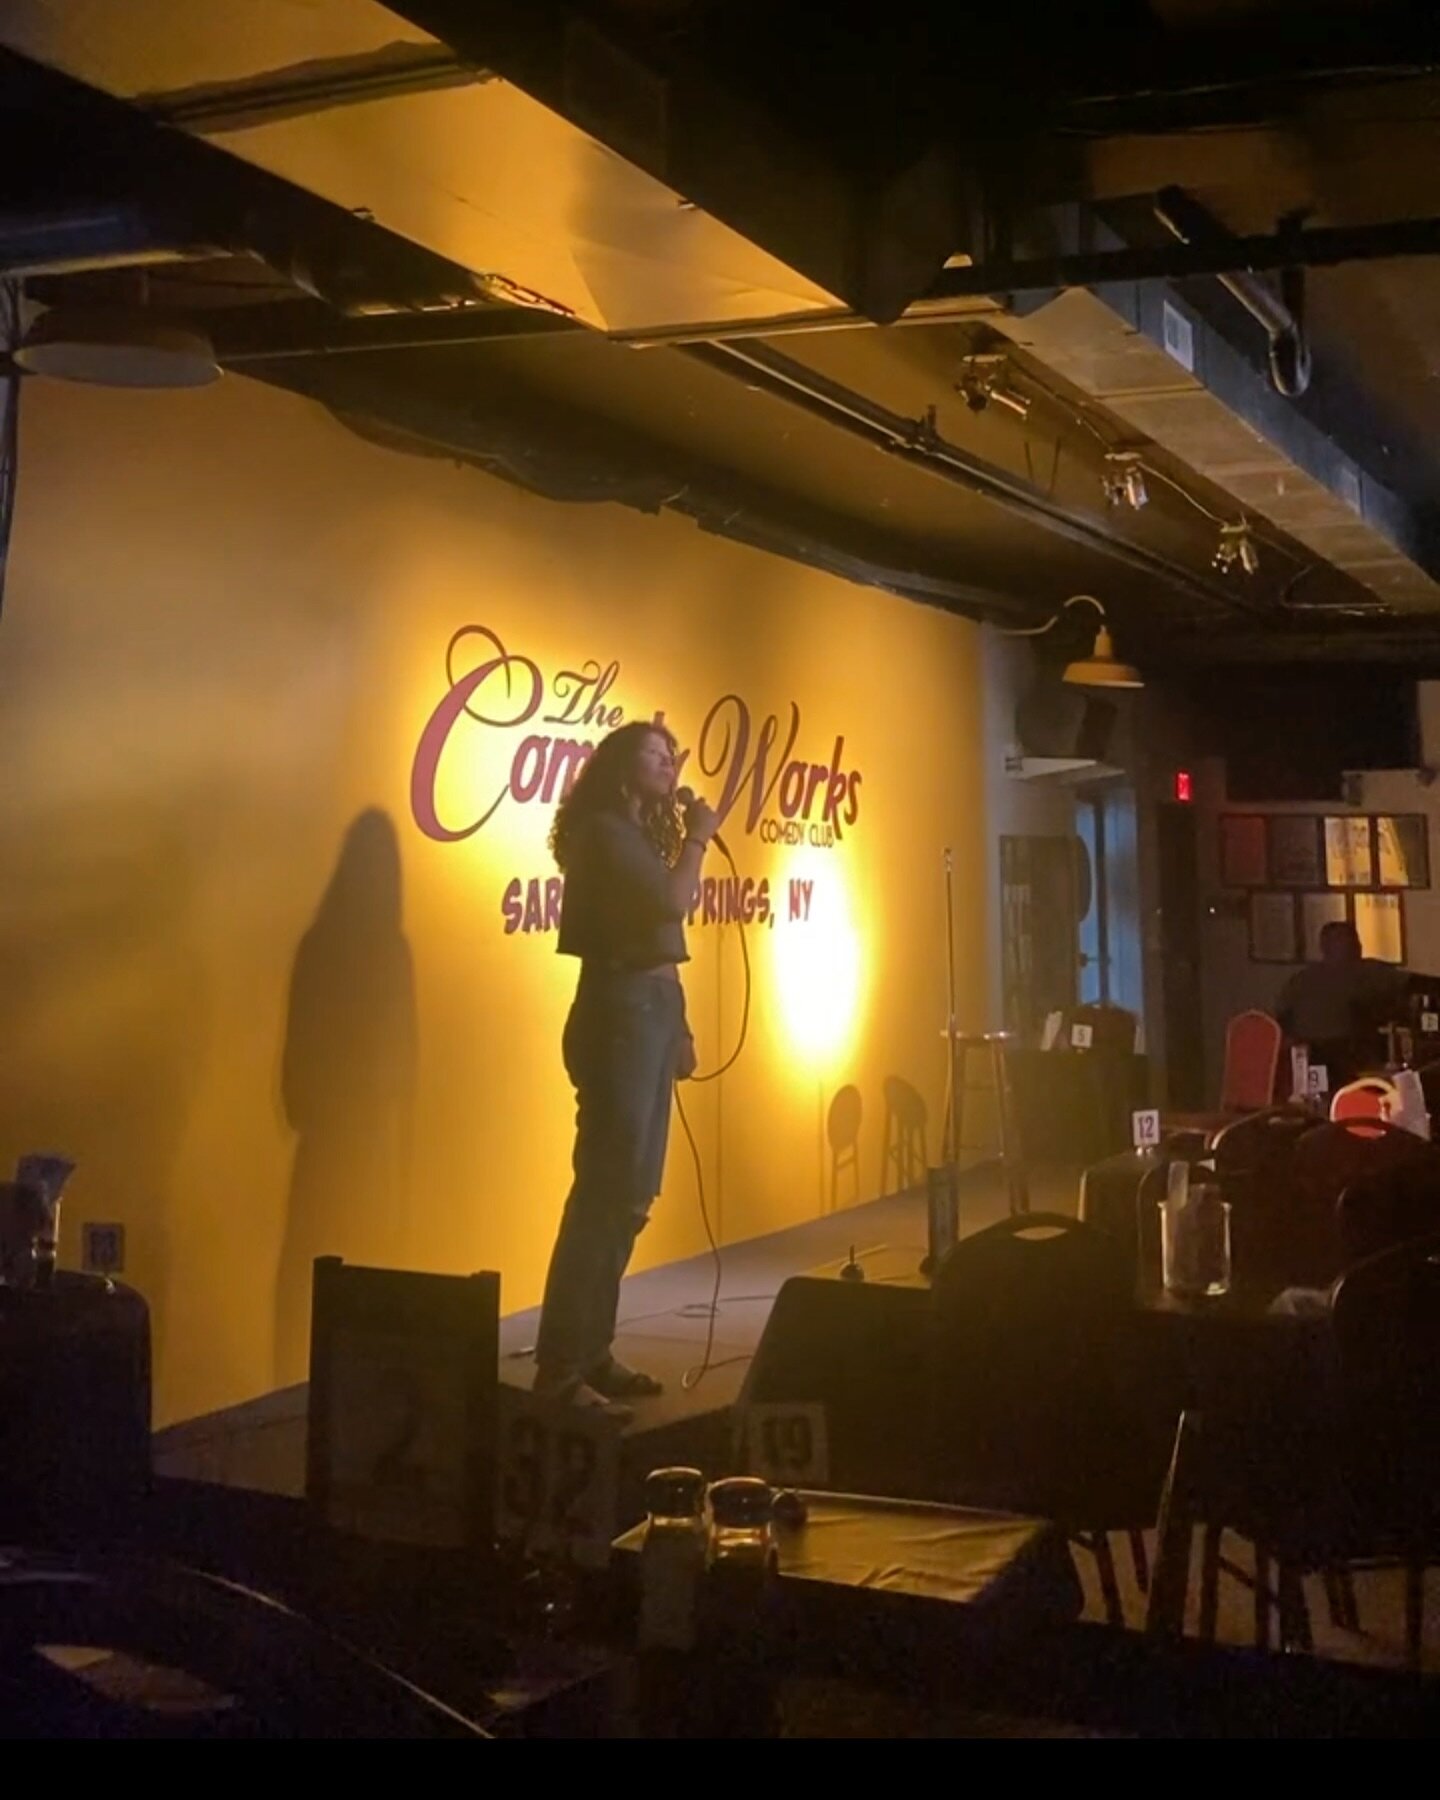 #throwbackthursday to my first ever open mic 10 months ago! It absolutely blows my mind to see how much I&rsquo;ve grown as a comedian (&amp; person!) since this night. I&rsquo;ve met some really special people &amp; have had so much damn fun. Super 